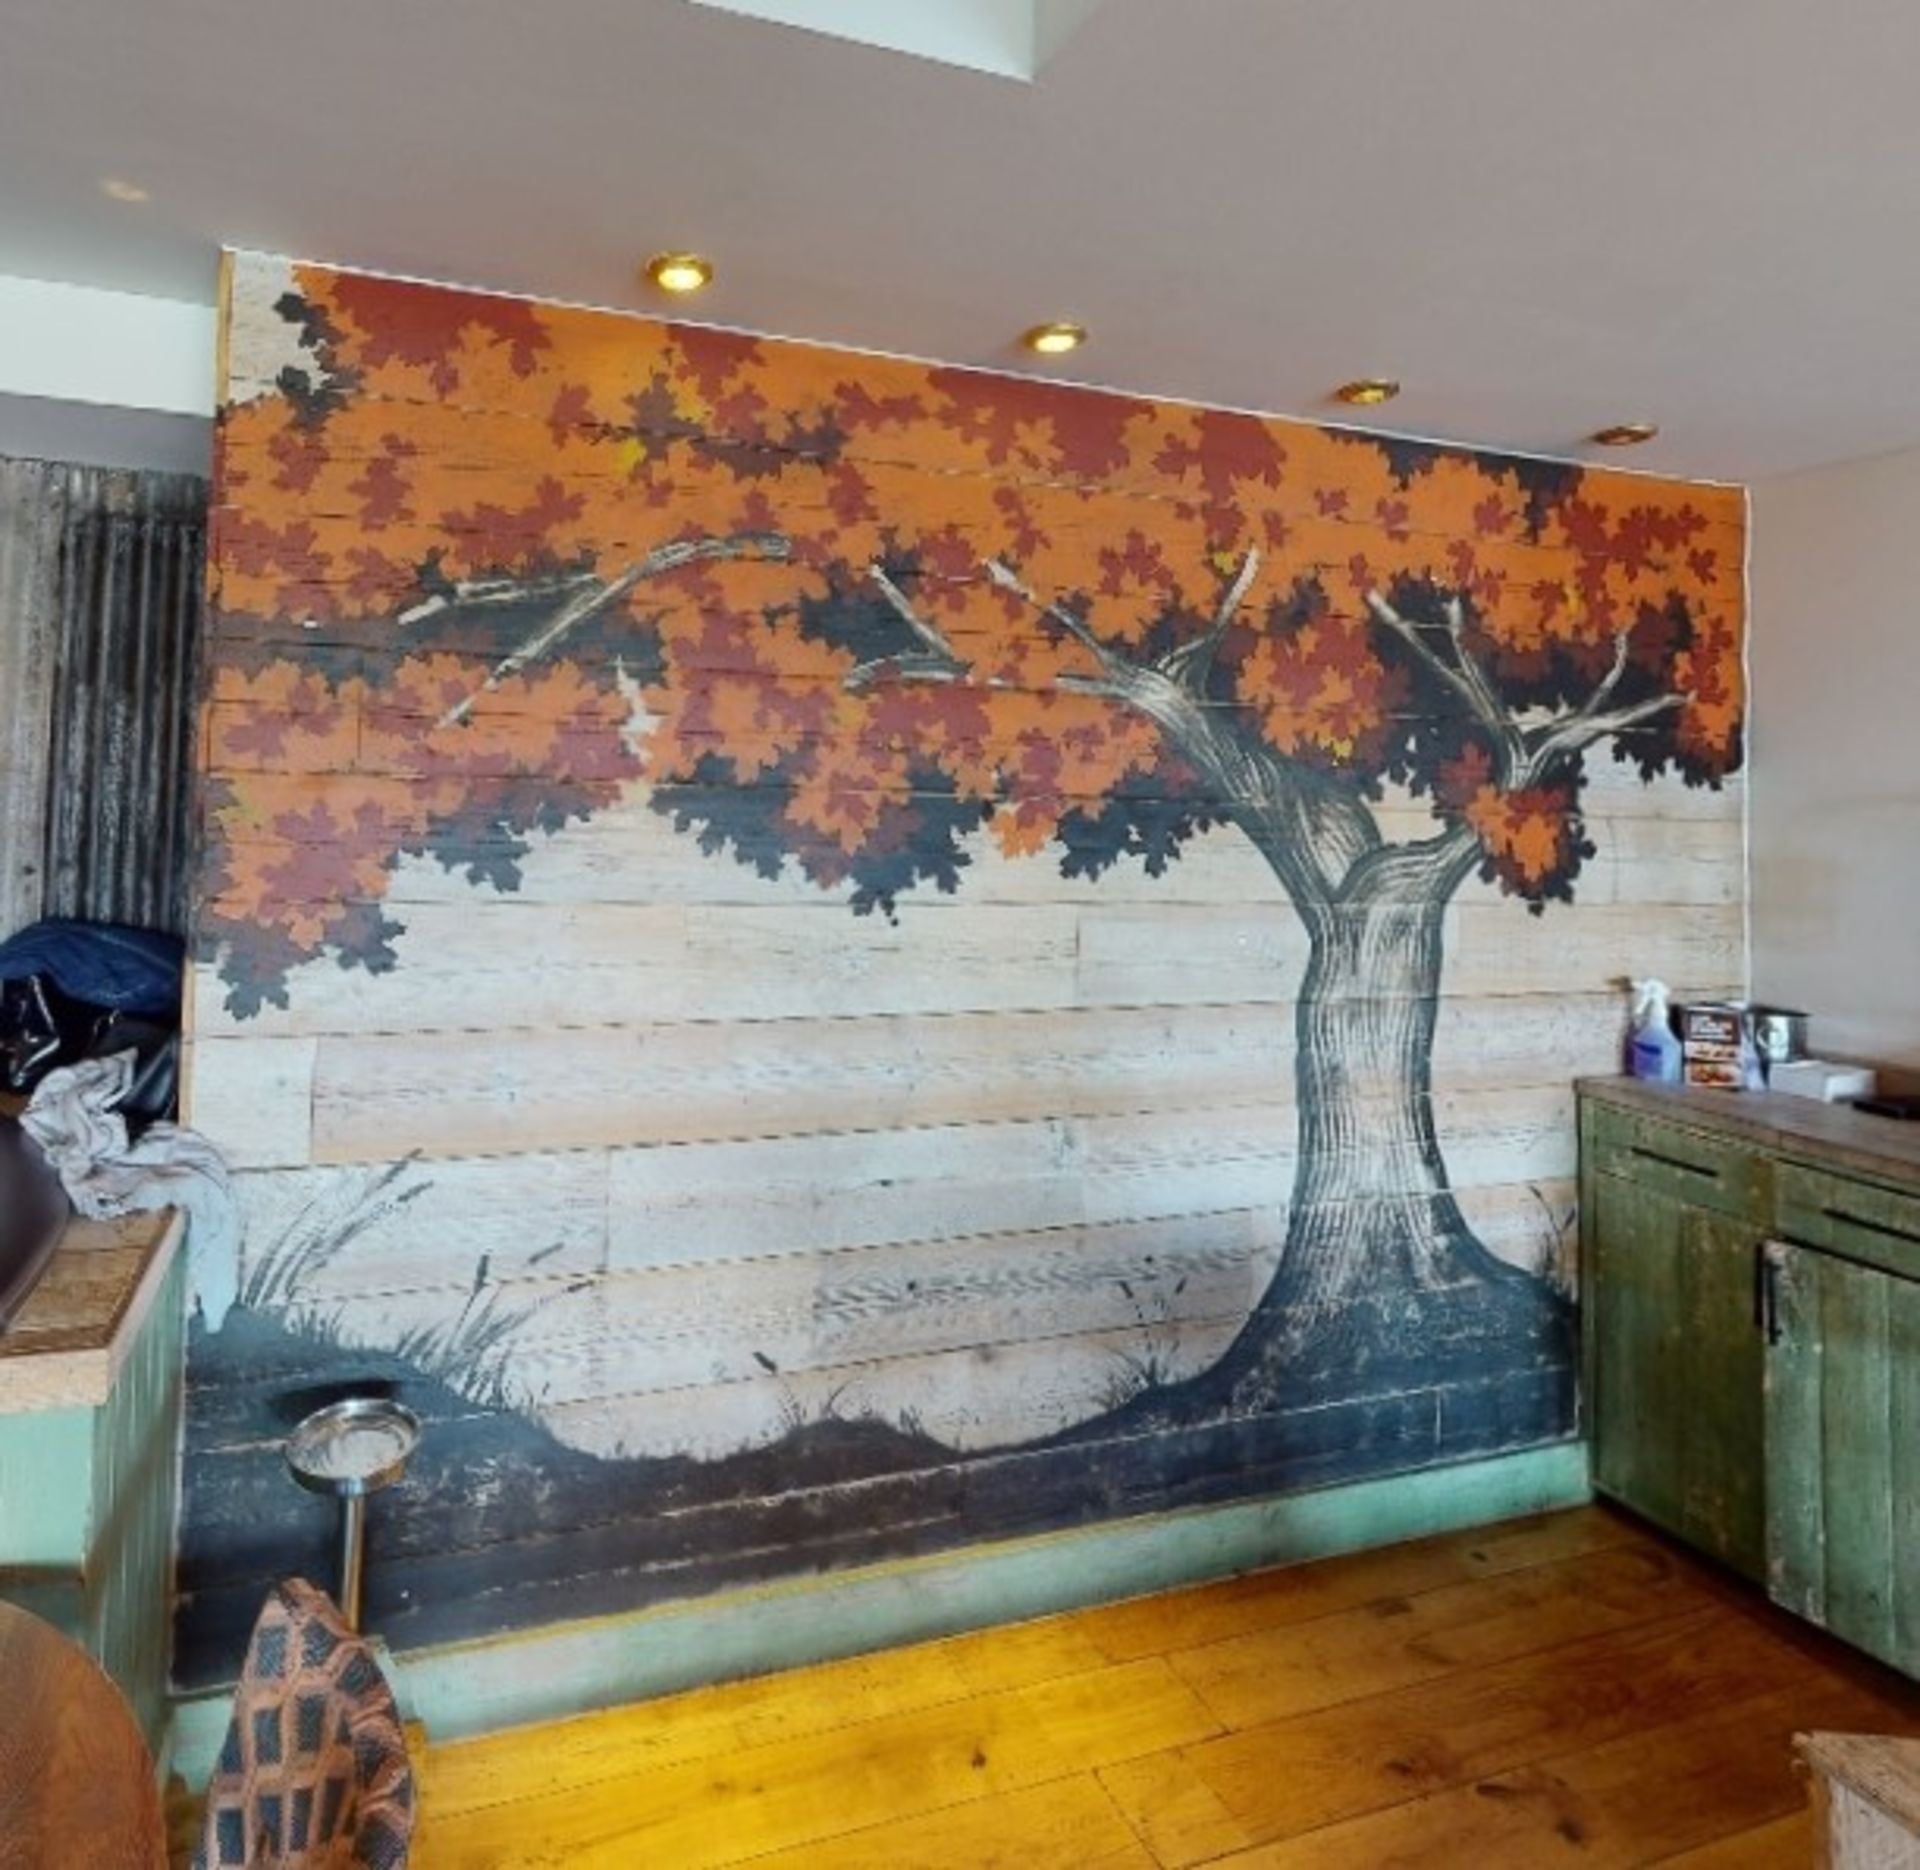 1 x Natural Wood Wall Covering Panels Featuring a Hand Painted Leafy Autumn Tree - Image 6 of 7